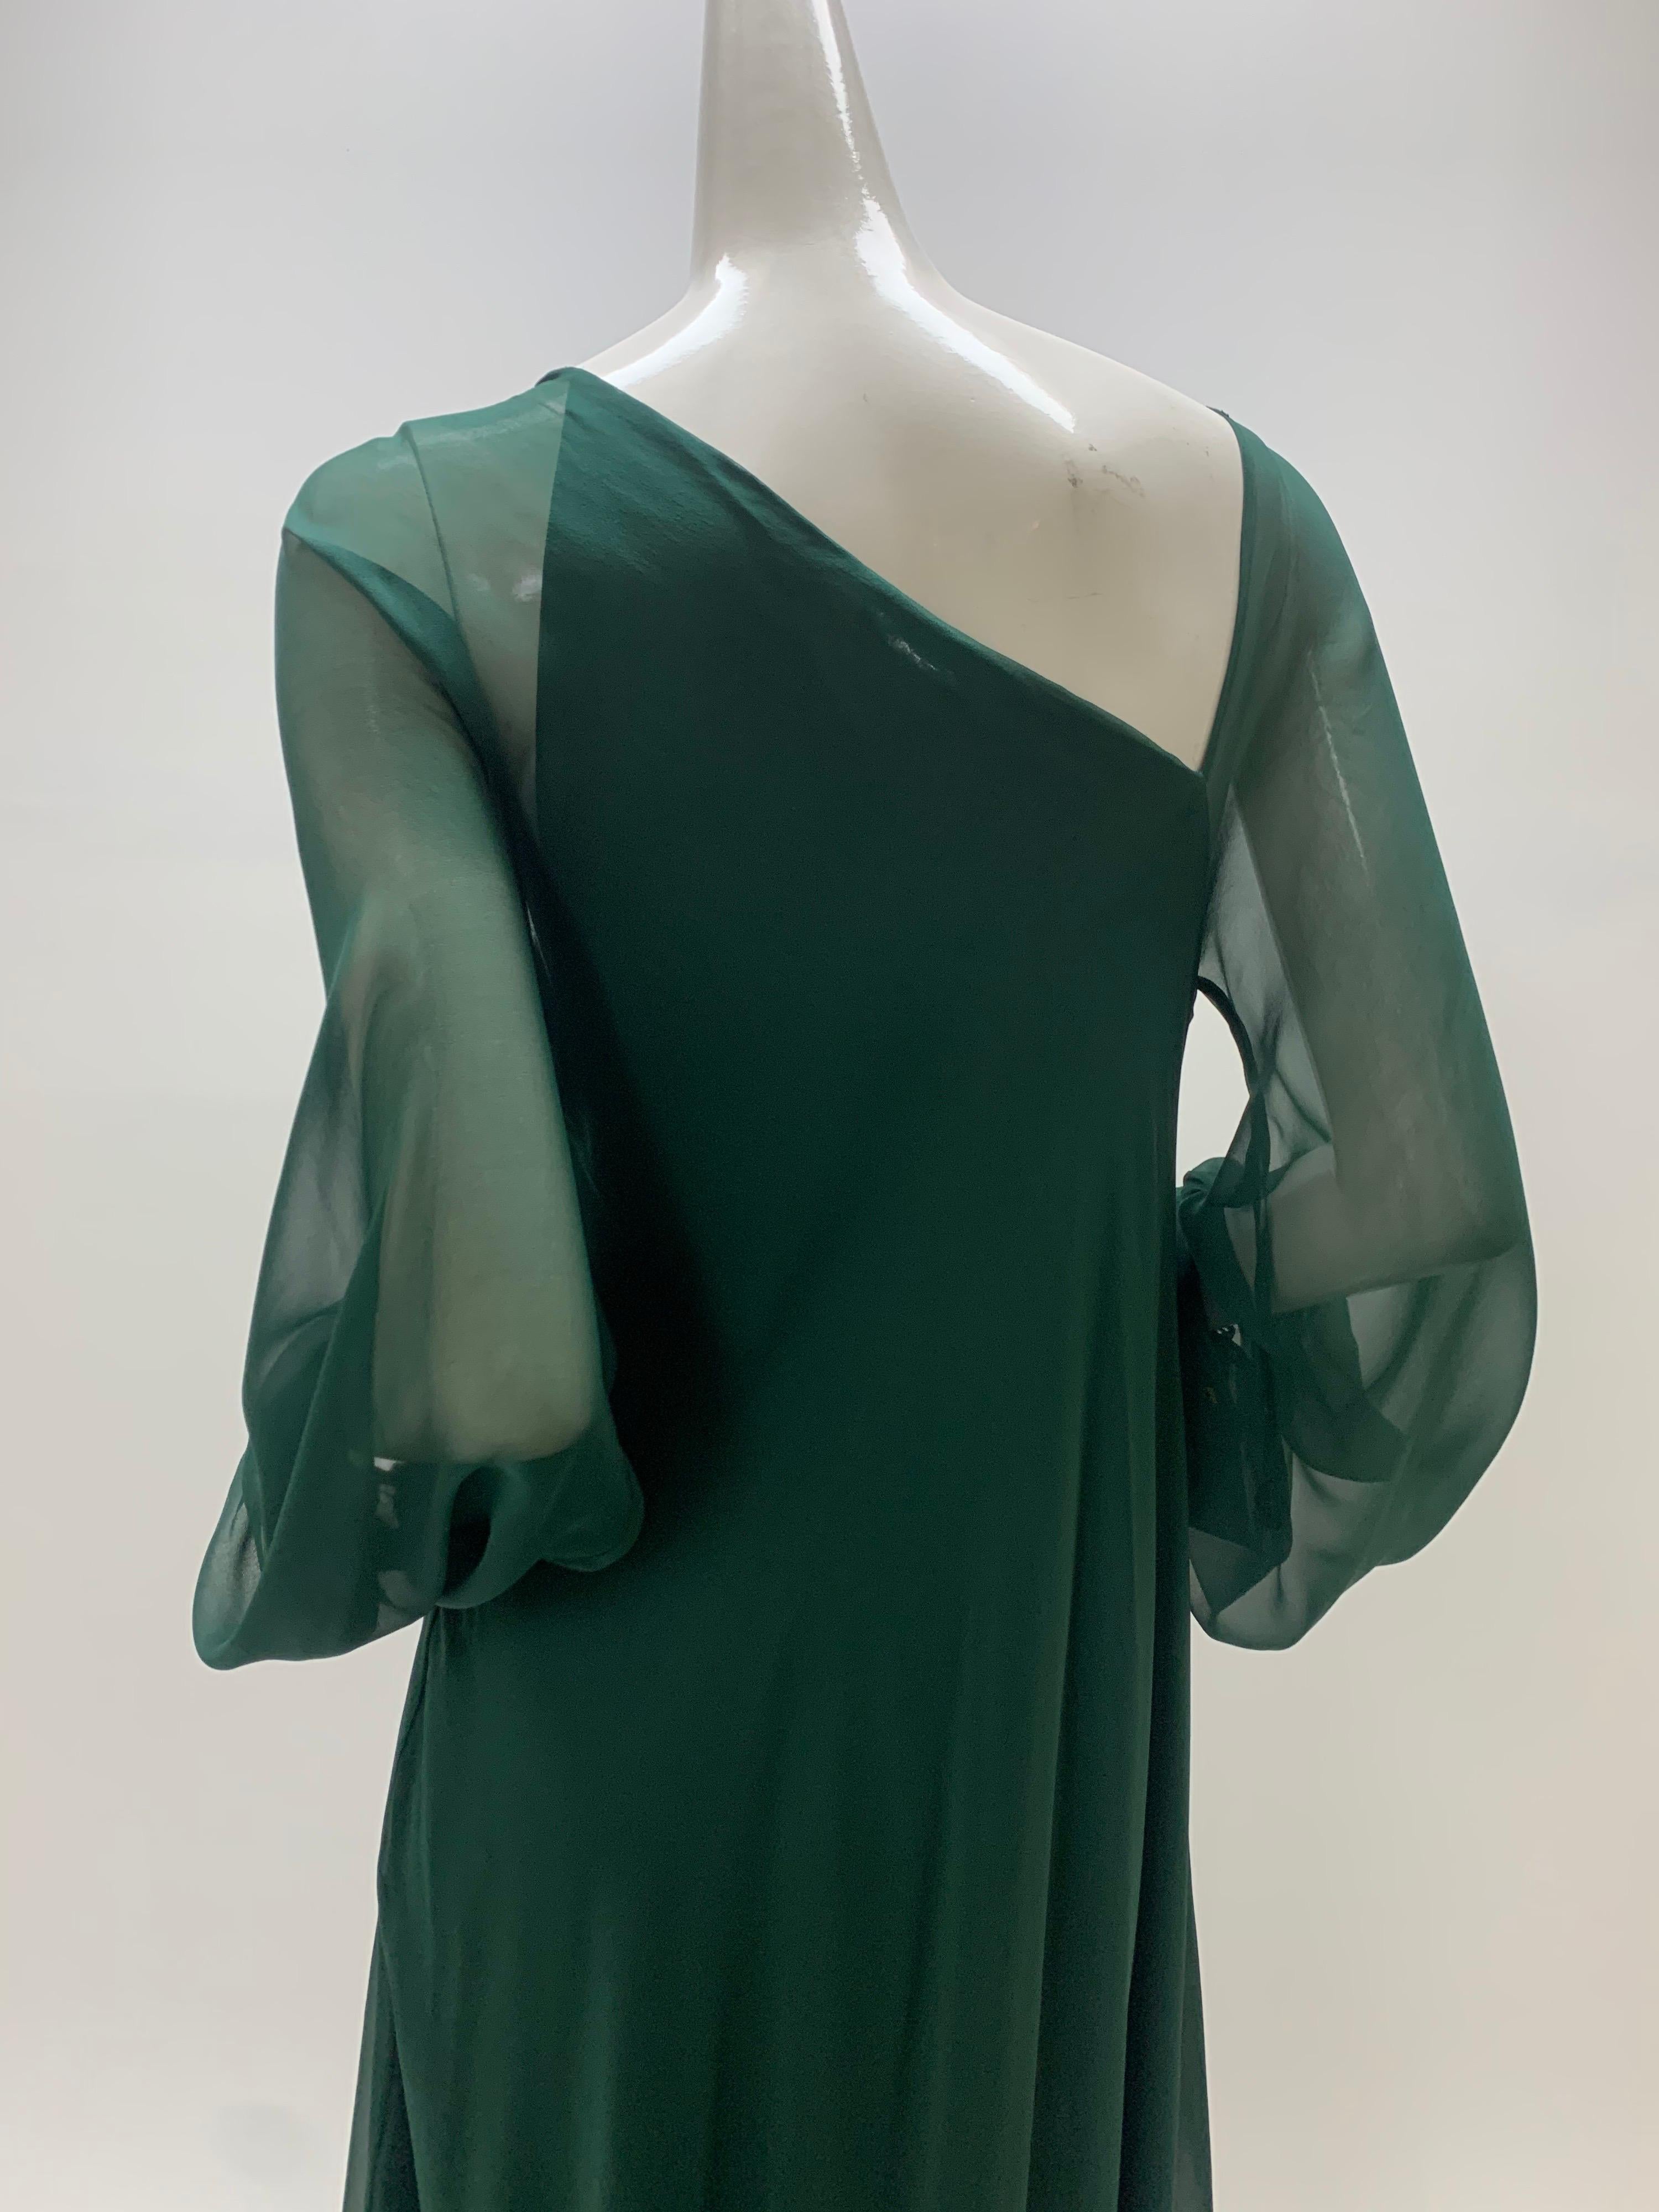 1970s Halston Forest Green Silk Chiffon Layered Bias Cut Asymmetrical Maxi Dress In Excellent Condition For Sale In Gresham, OR